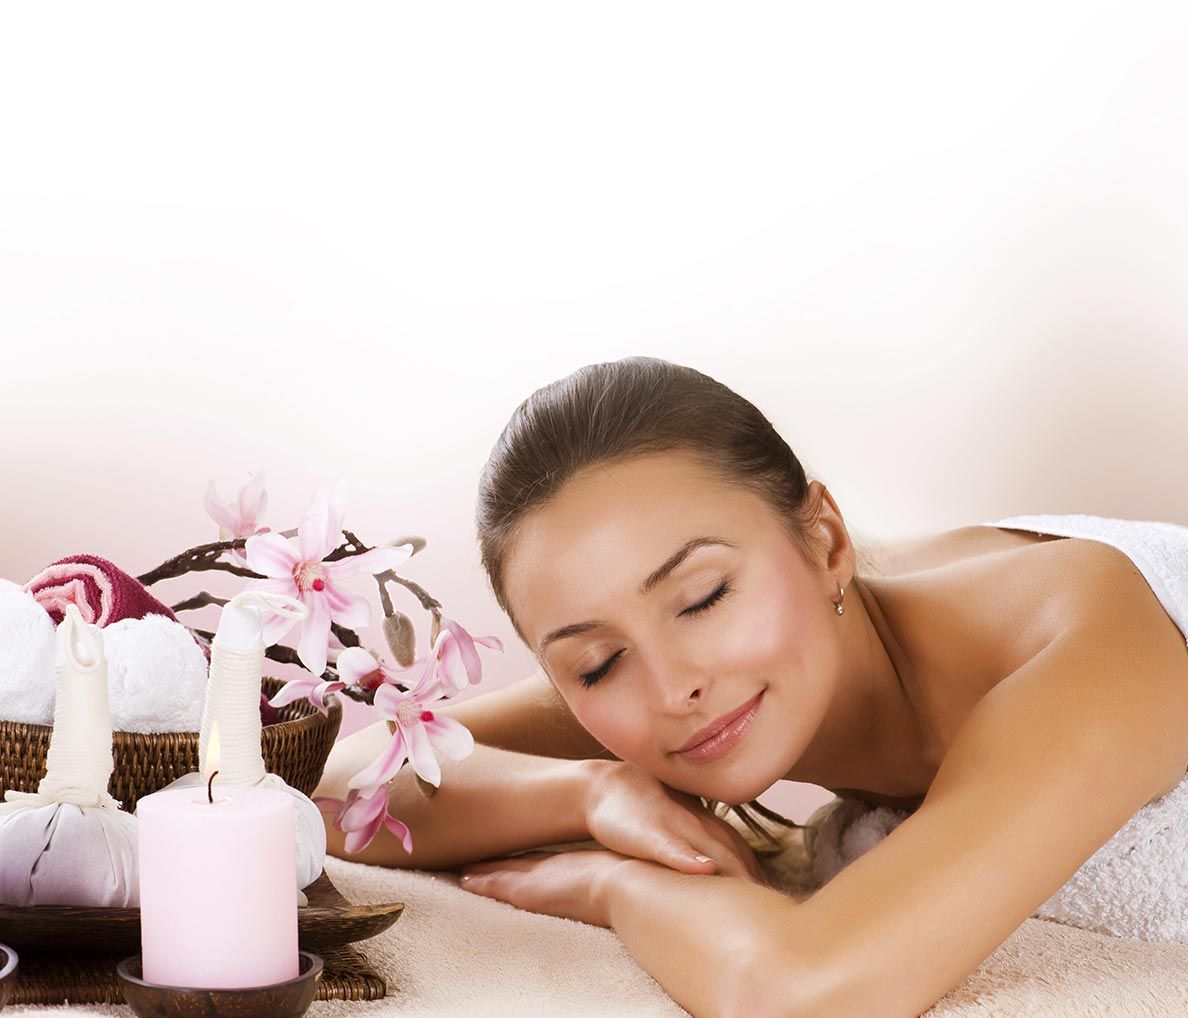 Day spa & beauty salon at Aristocracy Salon & Day Spa in Plymouth, MA